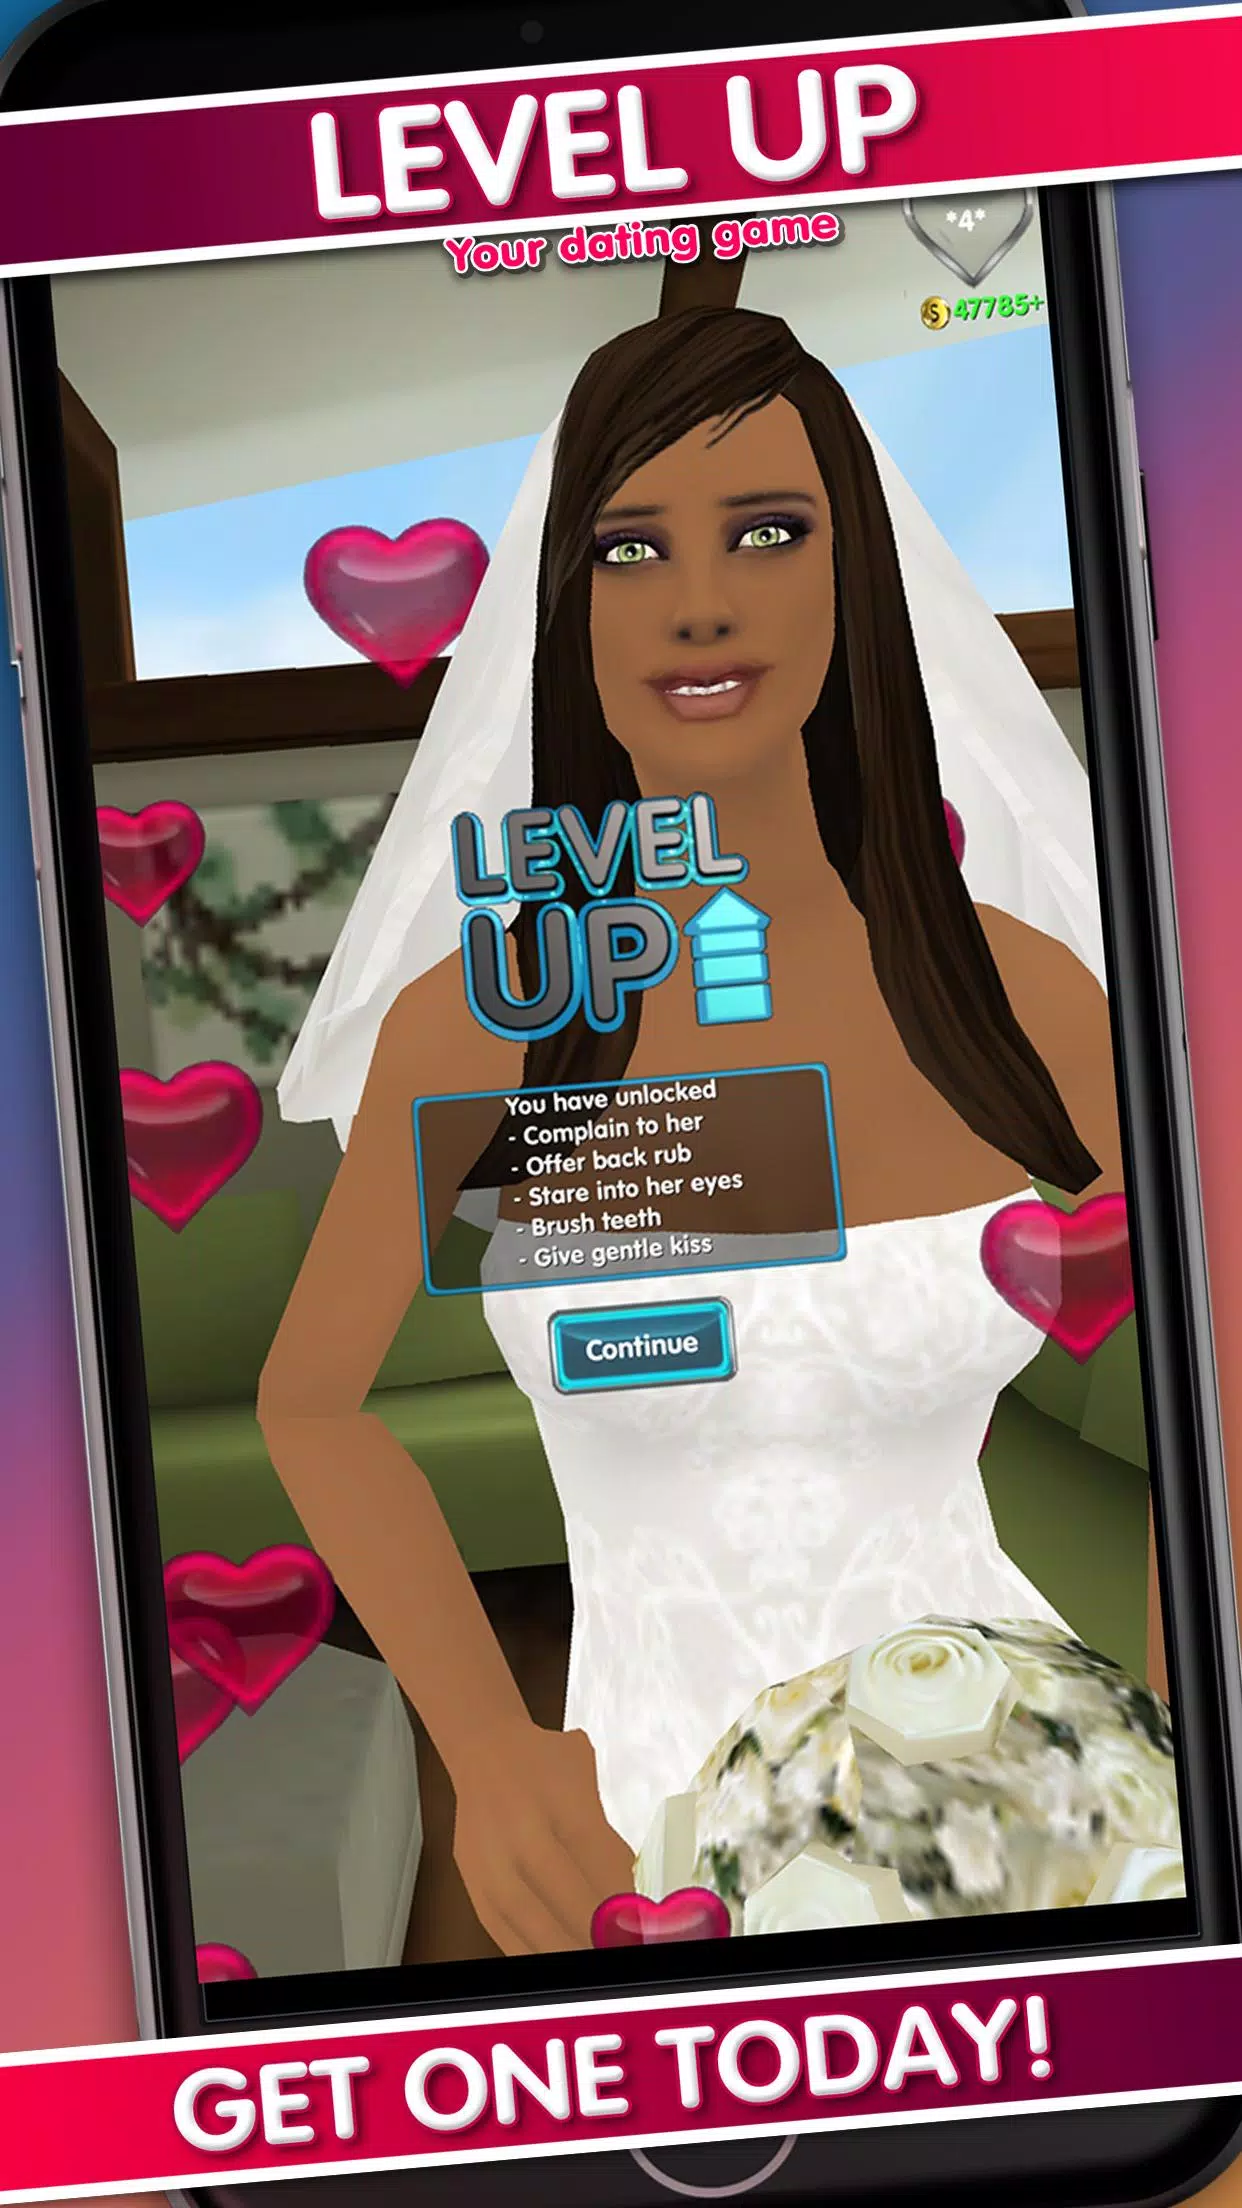 WILL YOU BE MY GIRLFRIEND? free online game on